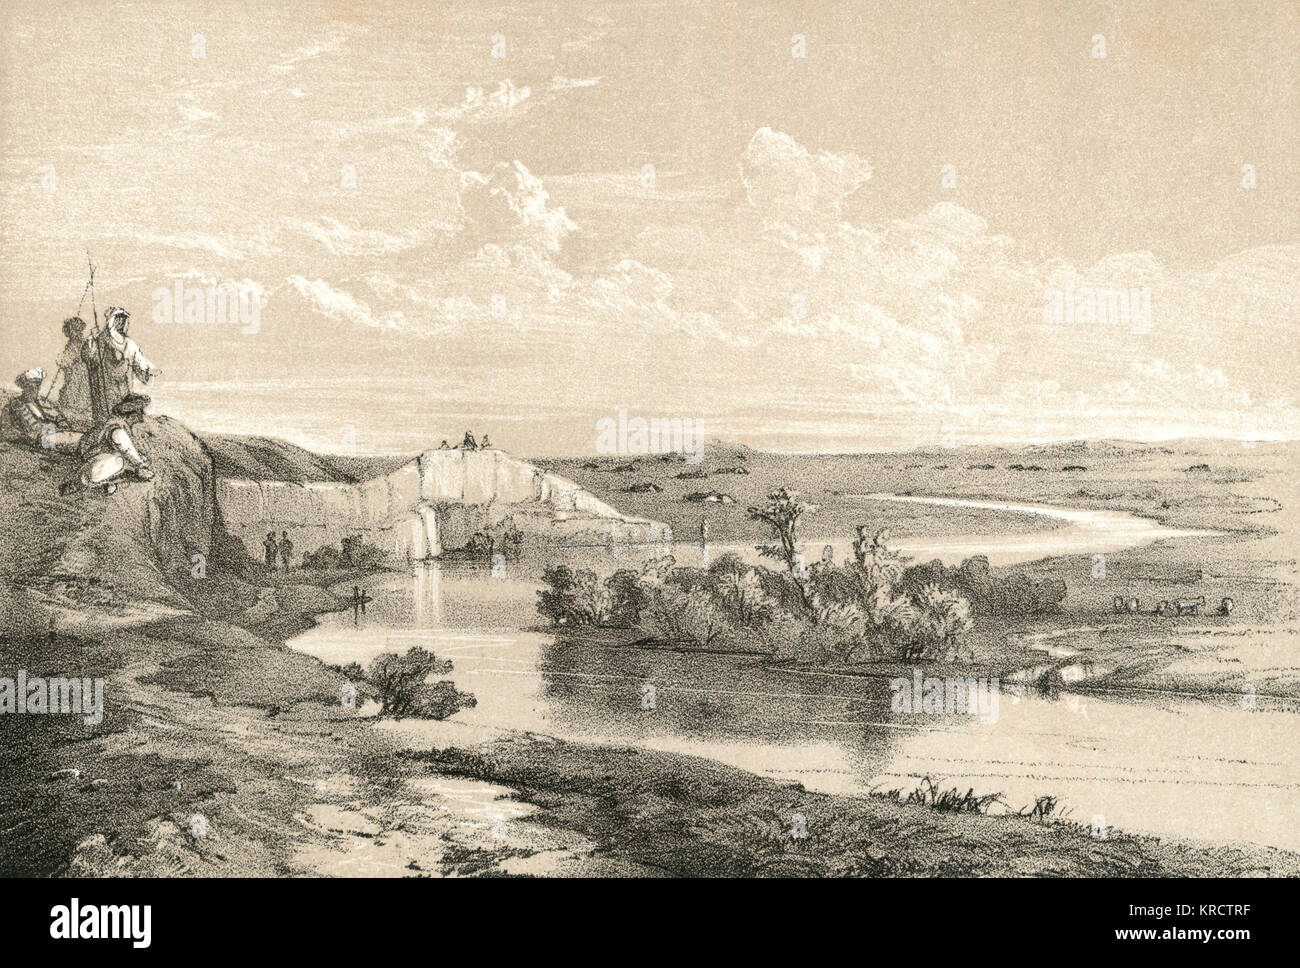 The Tell mound of the ancient Assyrian settlement and Palace at Aryan, on the course of the river Khabour in modern-day Syria. Date: 1853 Stock Photo